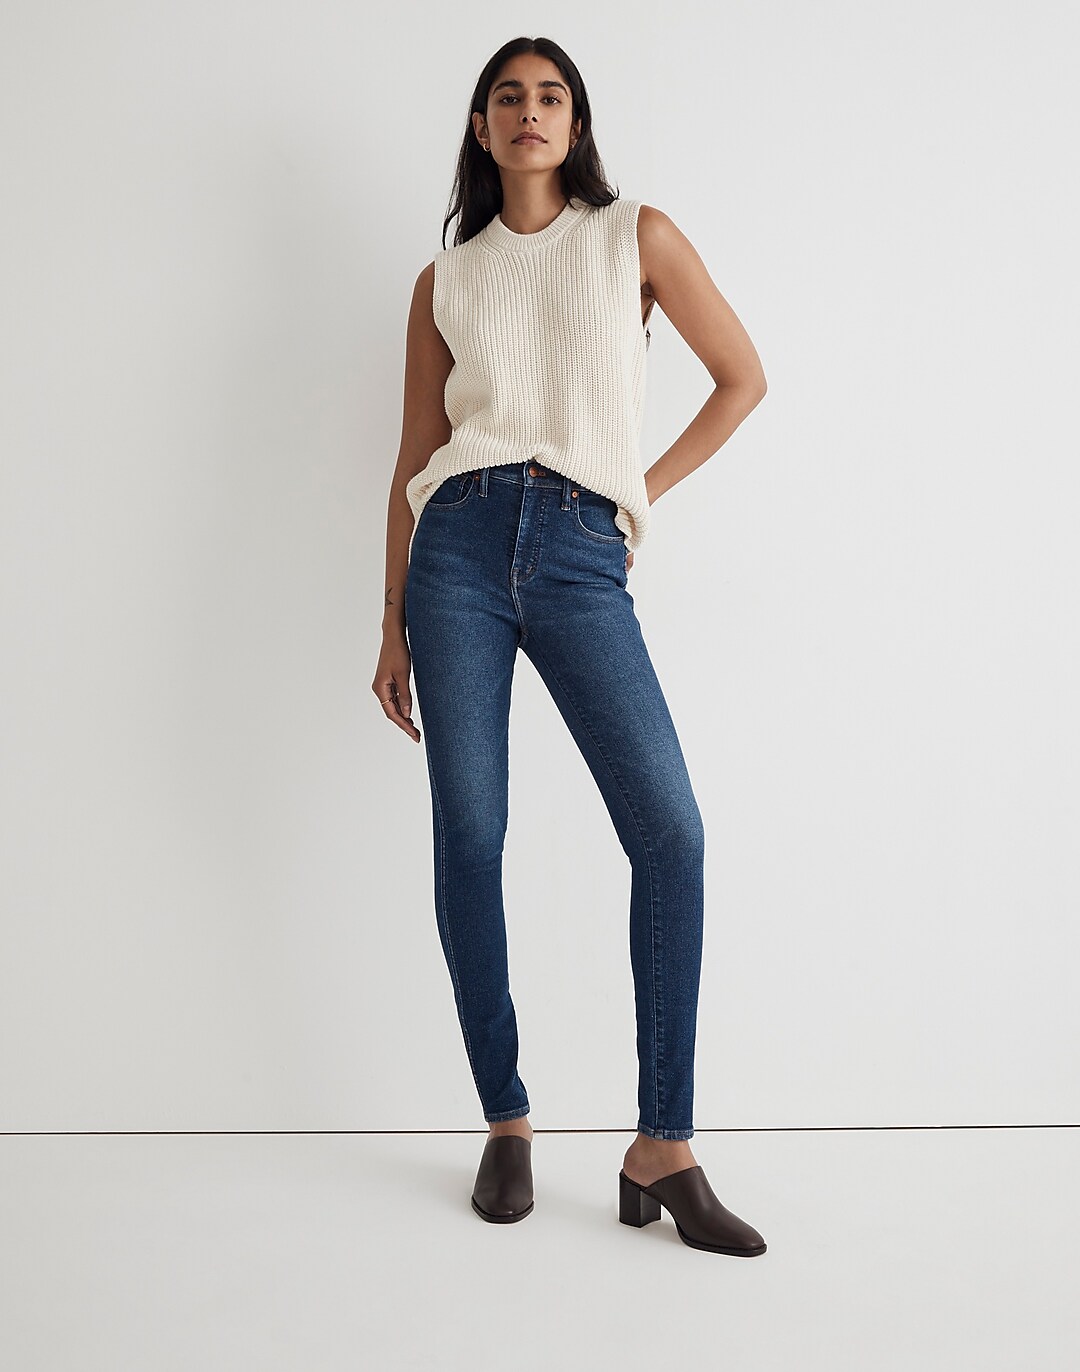 10 High-Rise Skinny Jeans in Smithley Wash